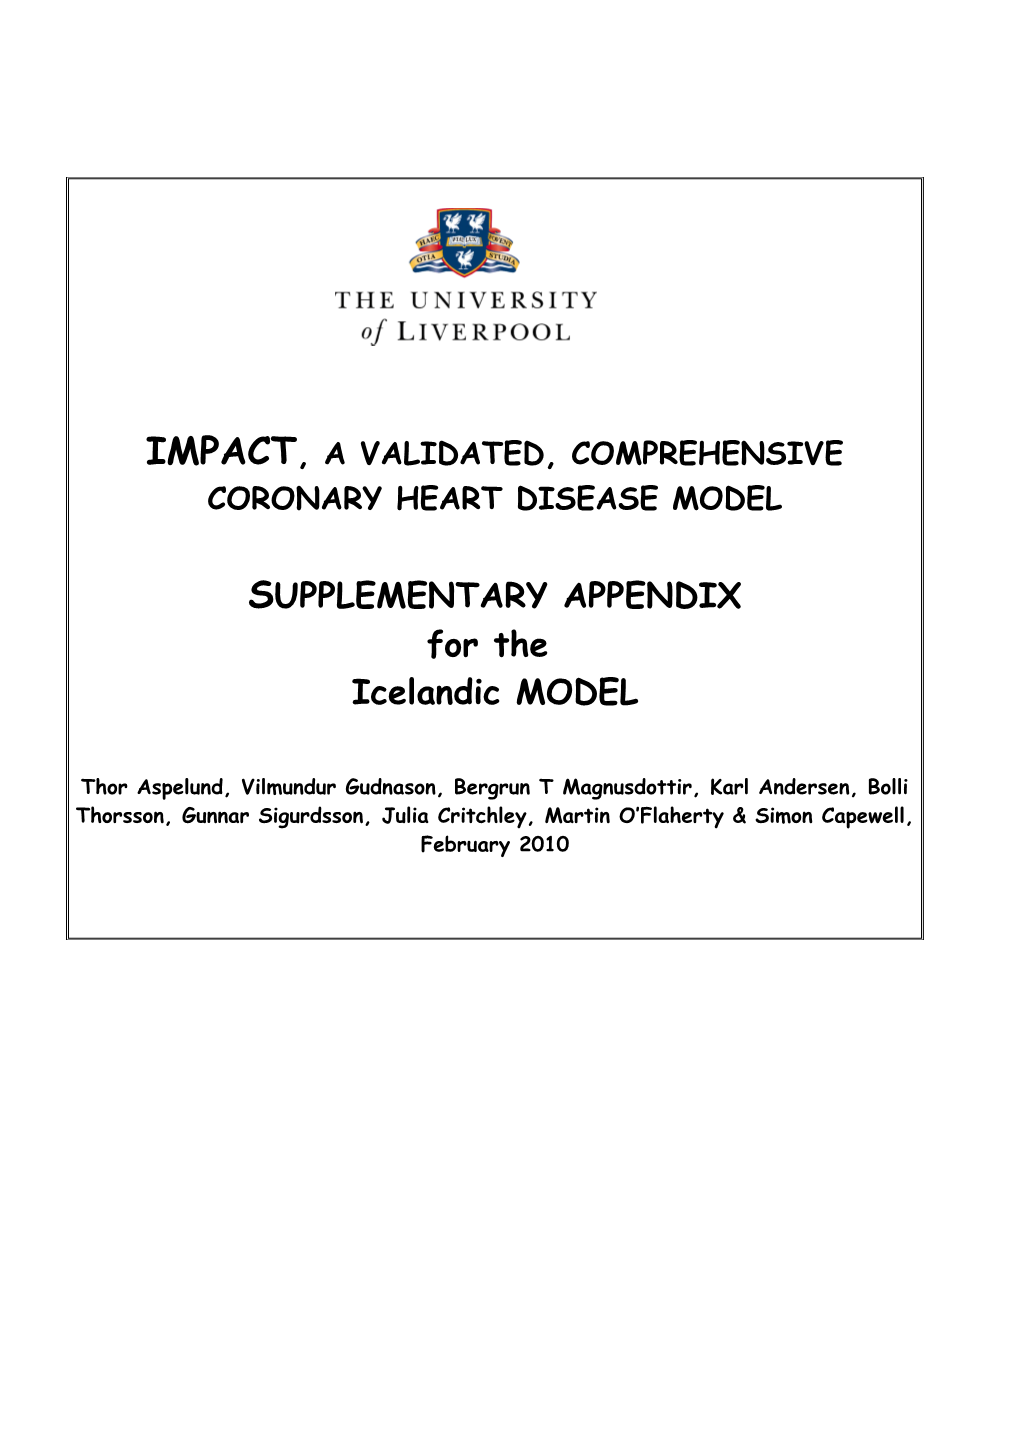 Supplementary Appendix for the Impact Model